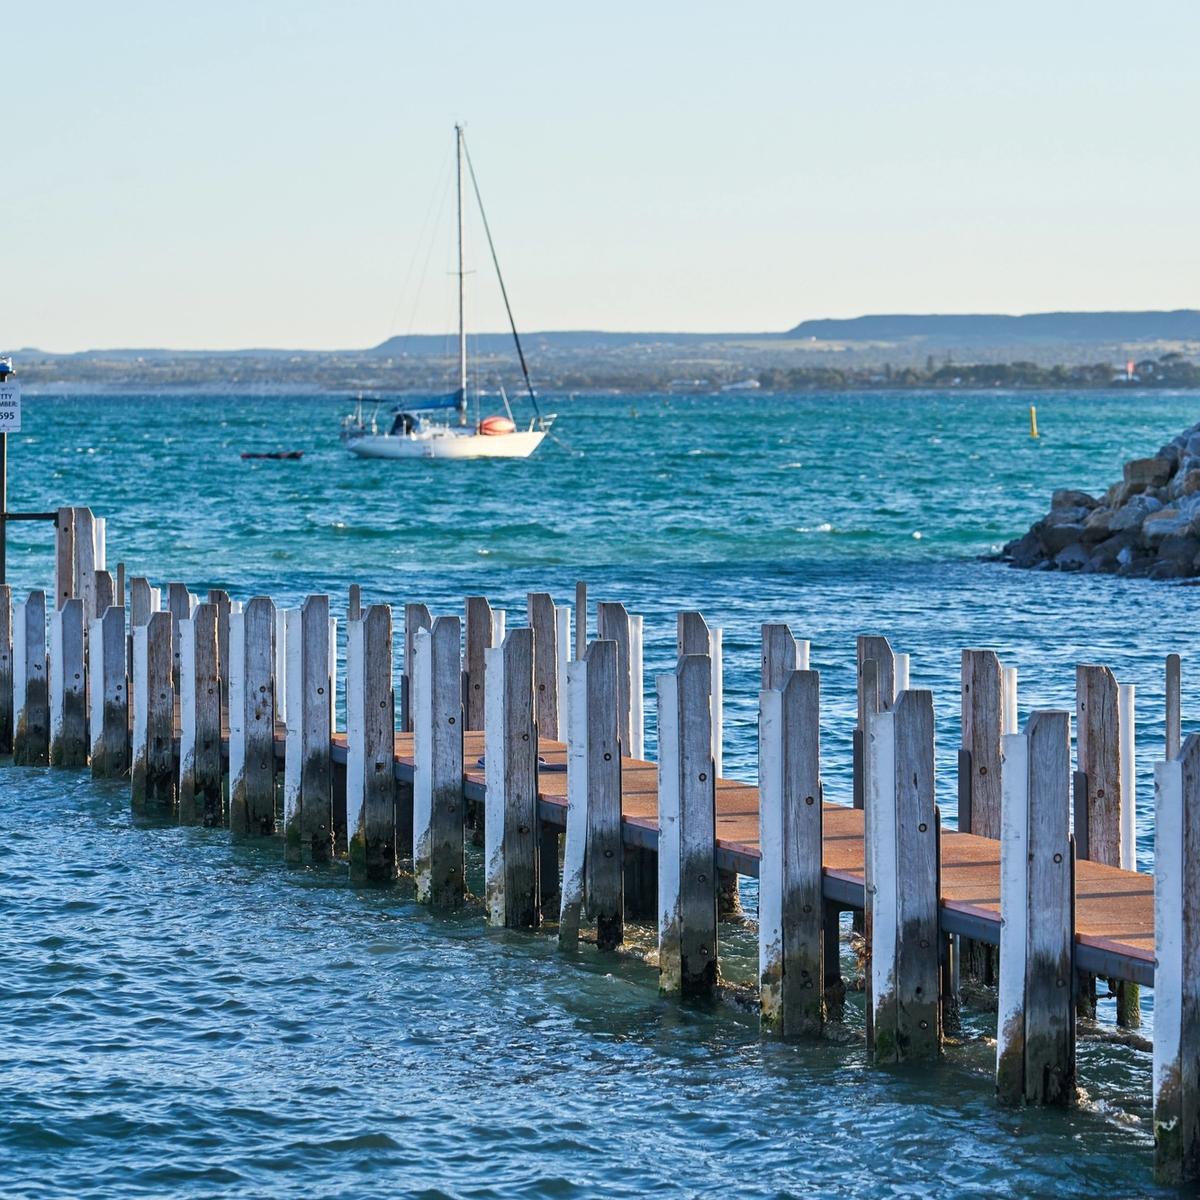 A sea shot from a jetty in Geraldton